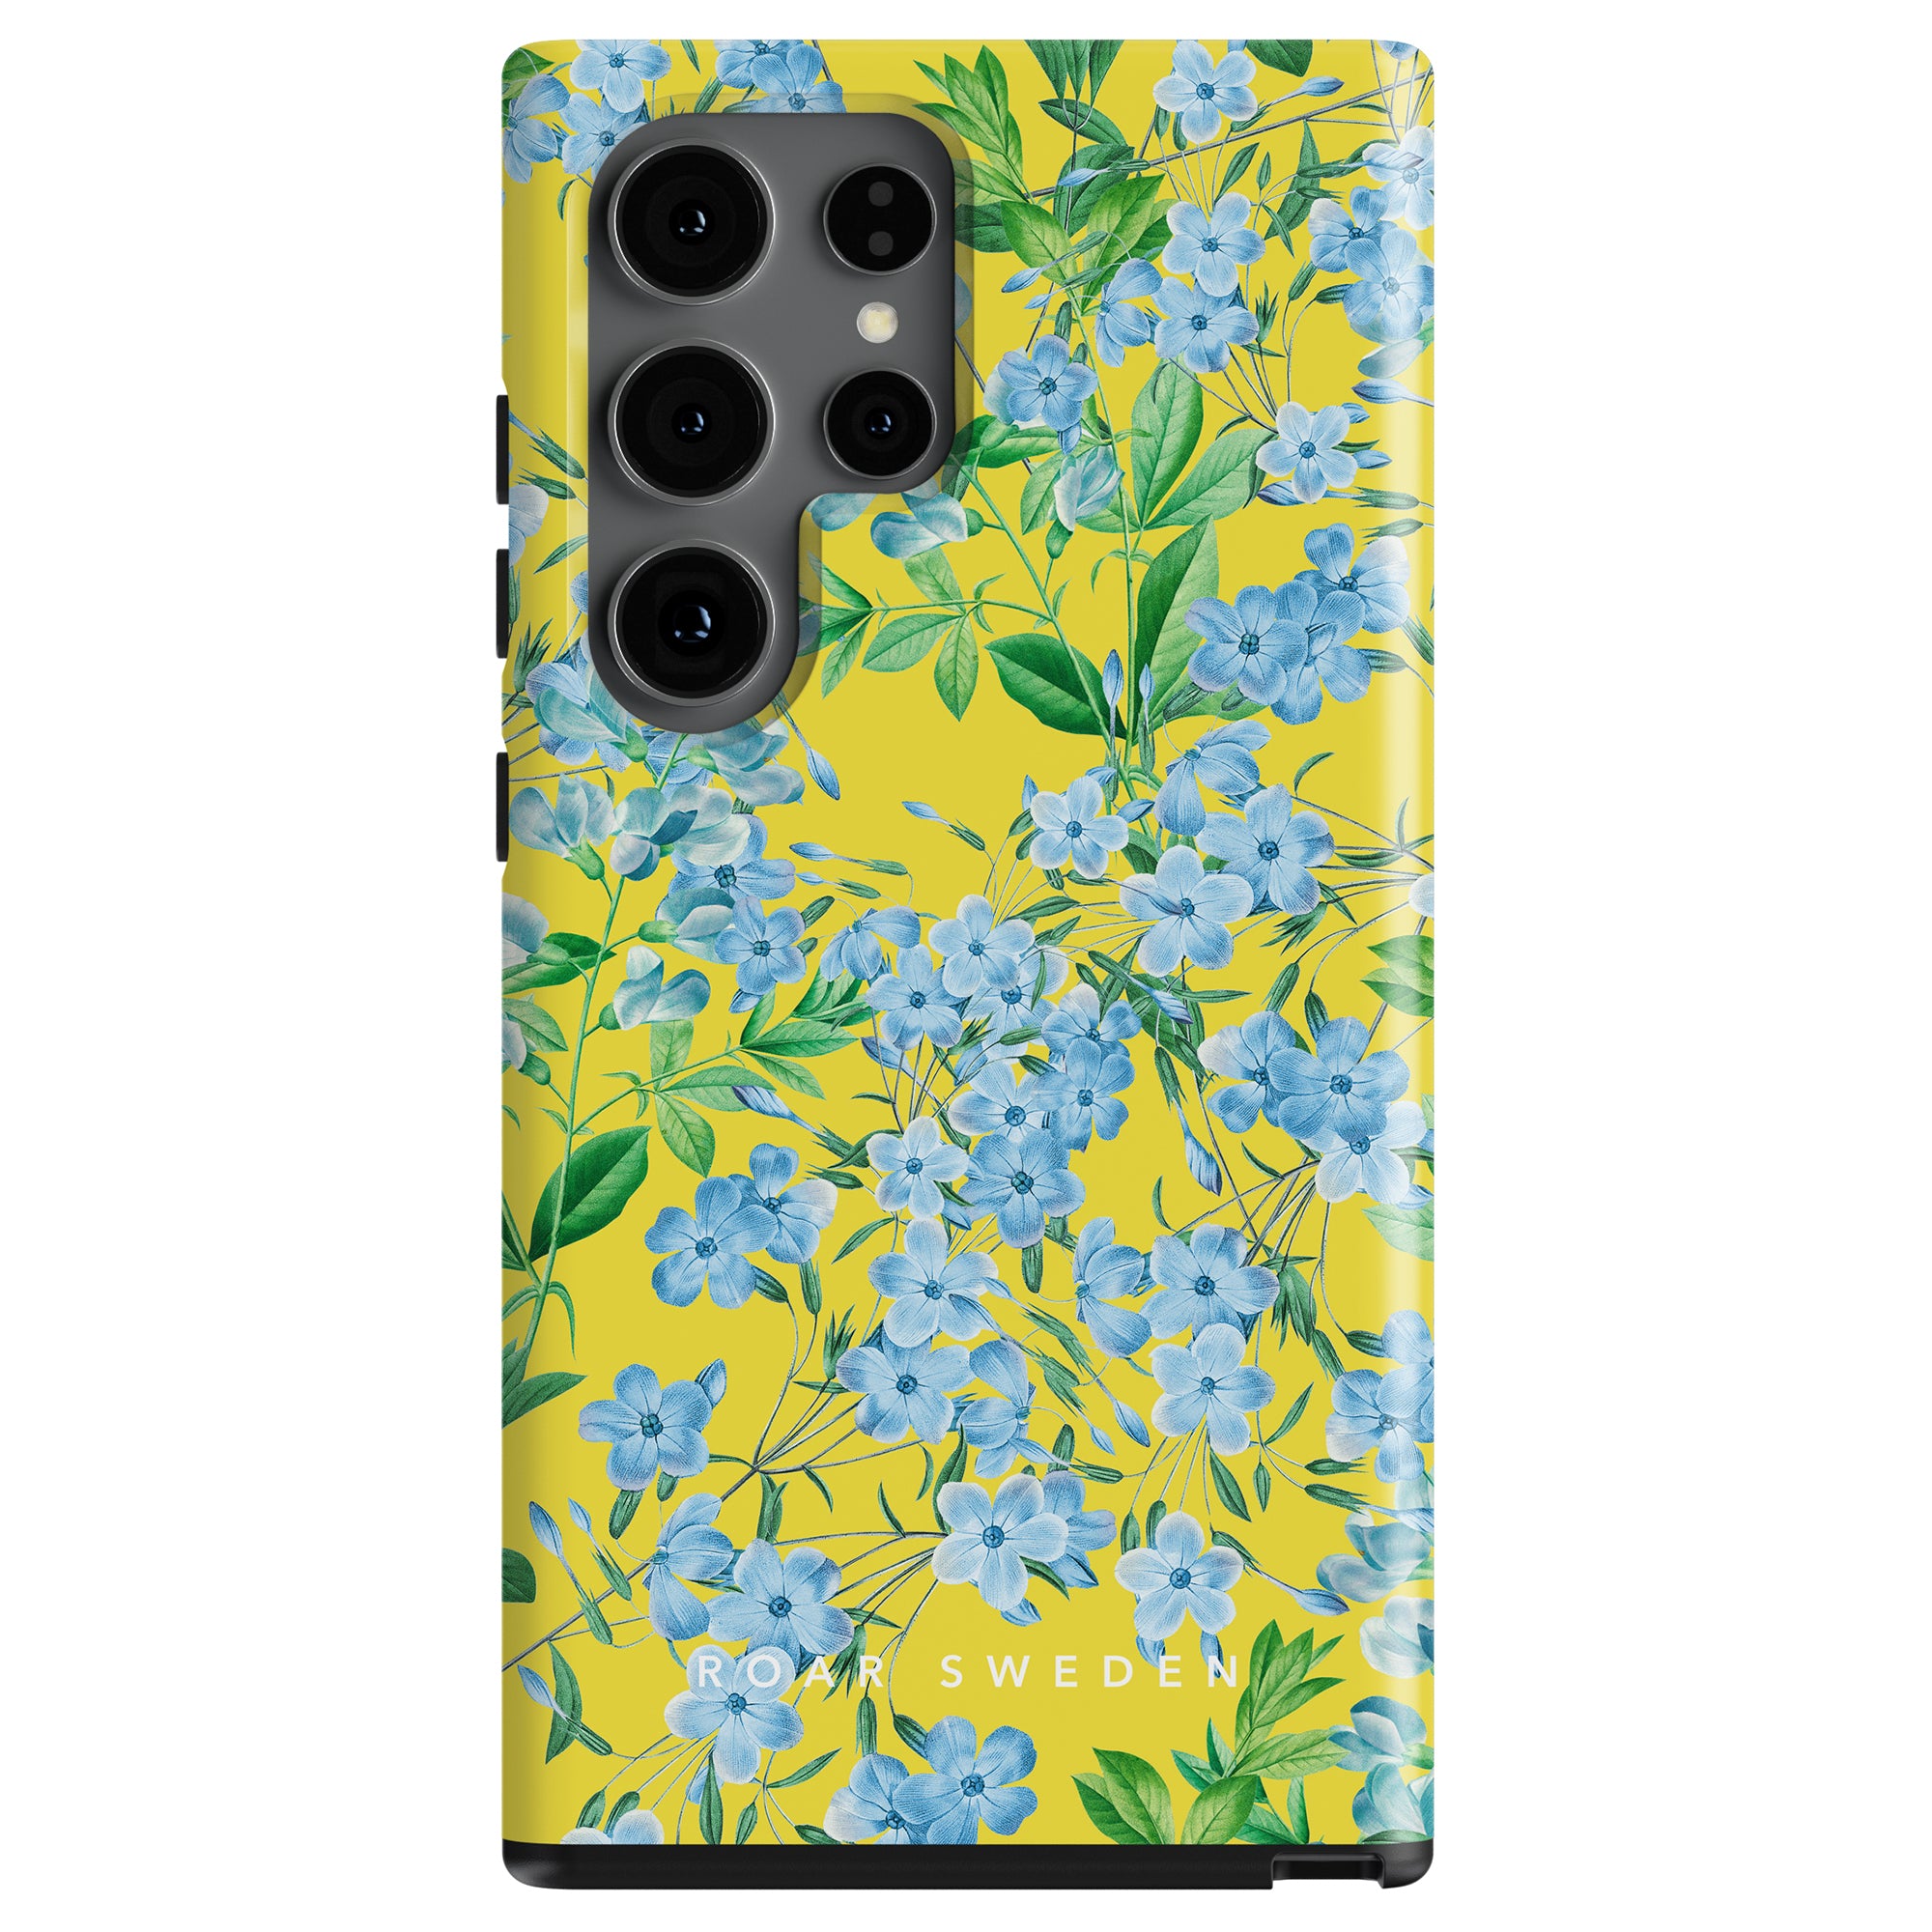 A phone case with a floral pattern featuring blue flowers on a yellow background, branded as part of the vår collection by "ideal of sweden", is a Spring Ditsy - Tough Case.